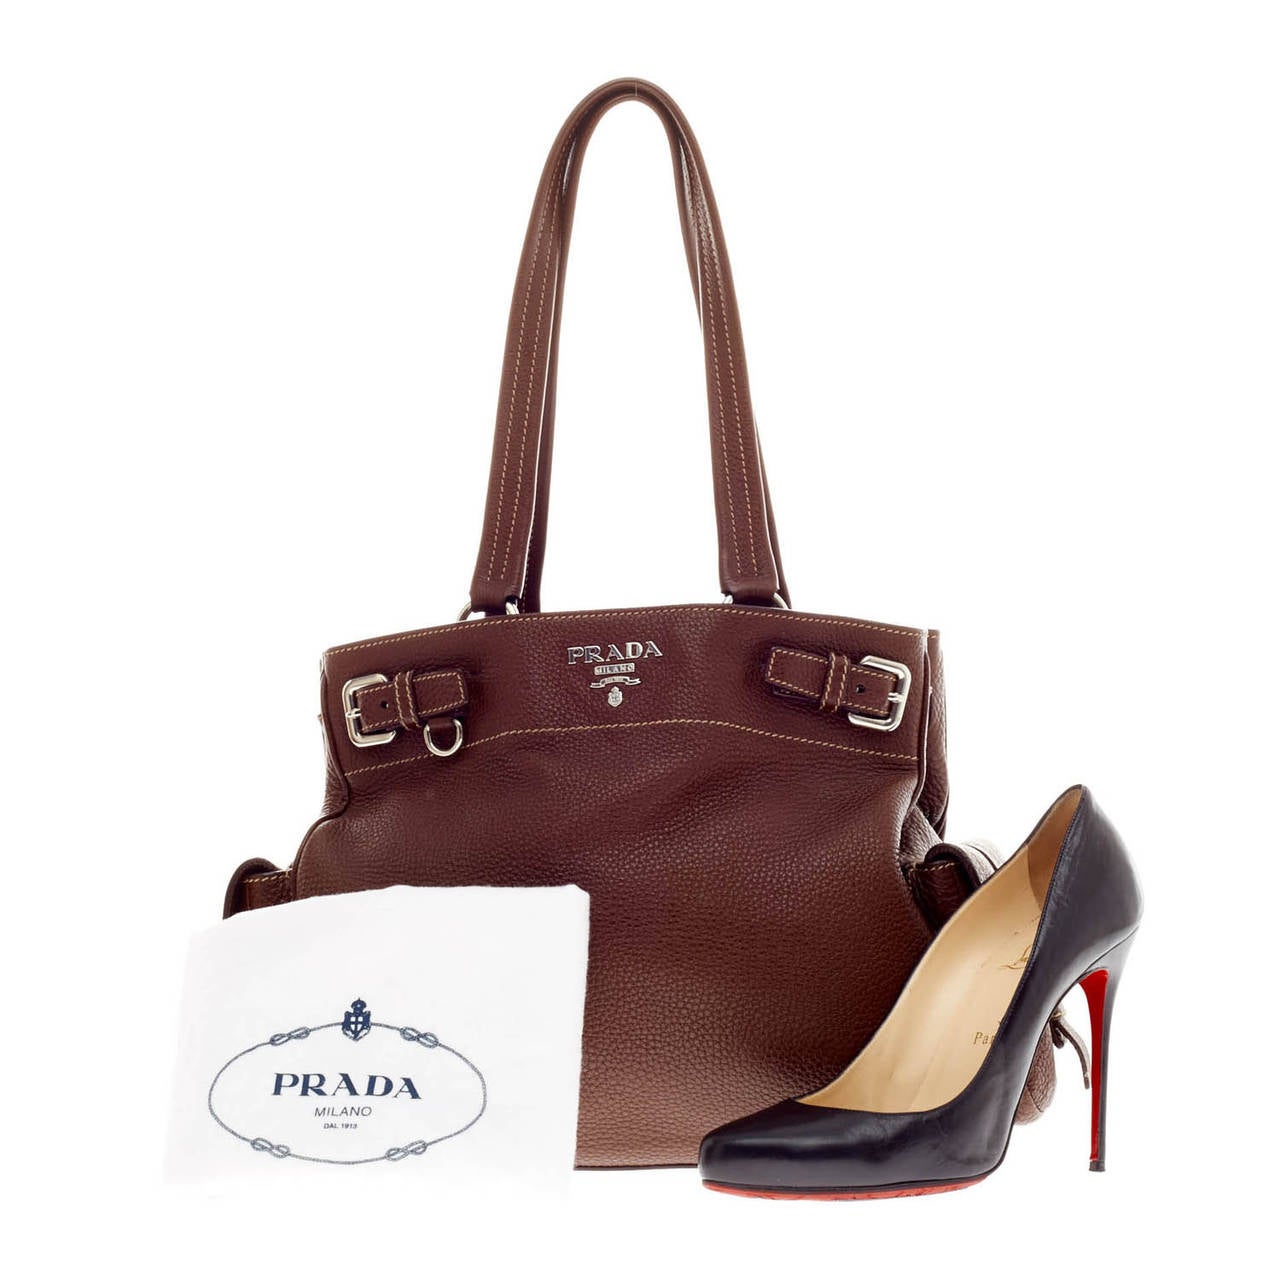 This authentic Prada Side Pocket Vitello Daino Belt Tote is a chic and sturdy everyday bag for both casual or sophisticated looks. Crafted from supple brown pebbled leather, this bag features long shoulder straps, silver-tone hardware, side pockets